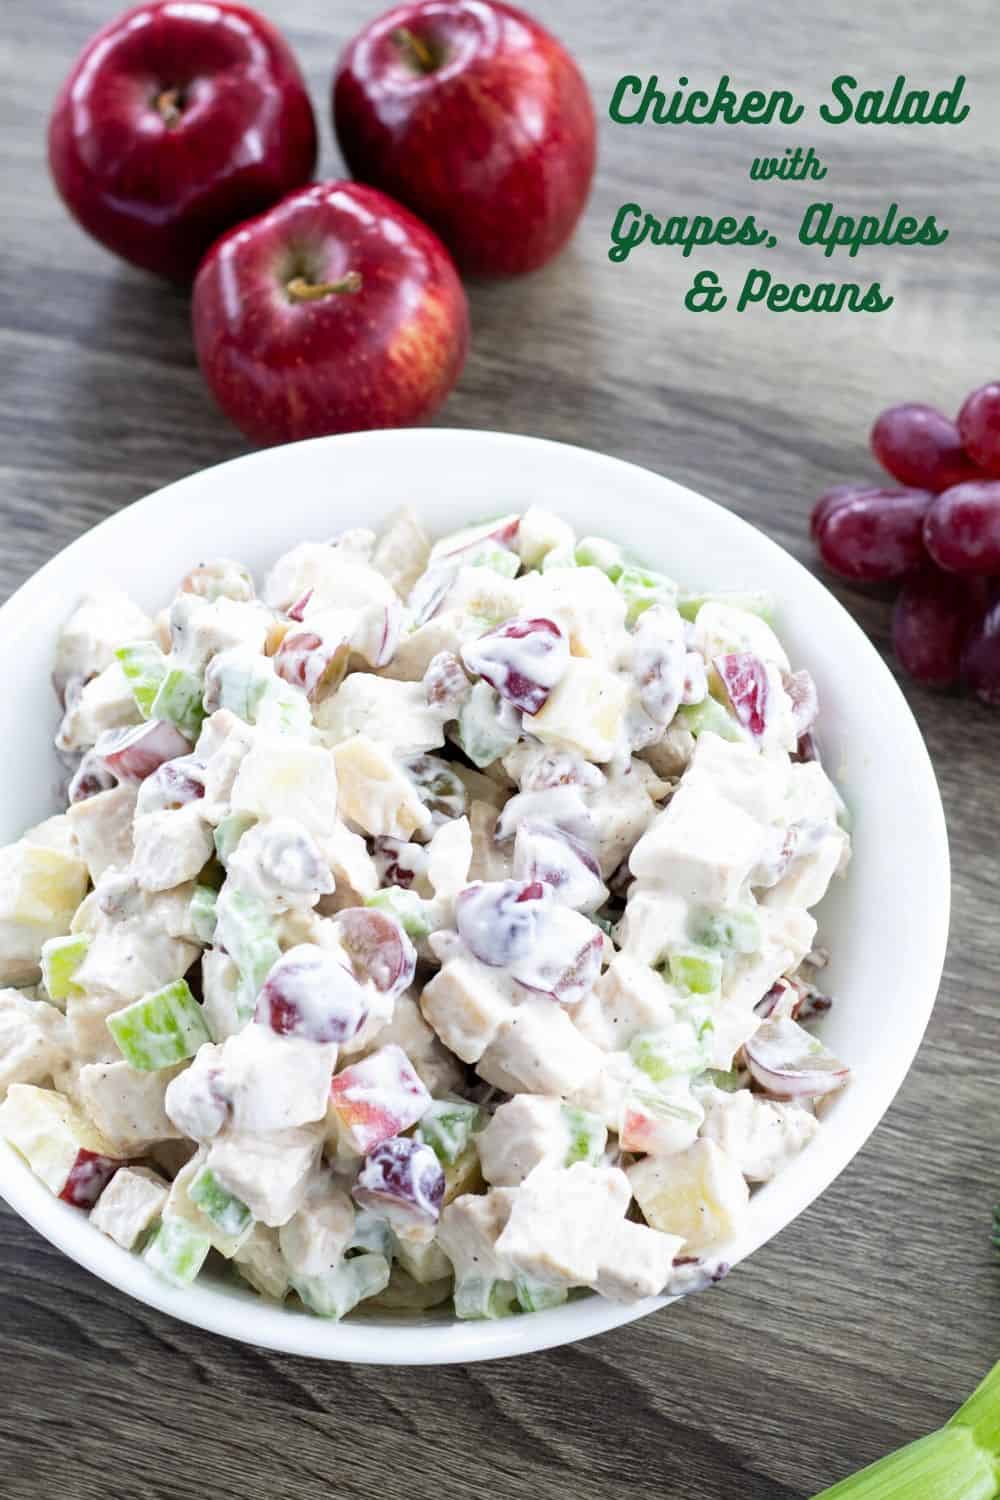 Arby’s Grilled Chicken & Pecan Salad (Copycat) features chicken, grapes, apples, celery, mayo, yogurt, salt, and pepper. It is healthy and delicious! #copycat #chickensalad #arbys  via @mindyscookingobsession